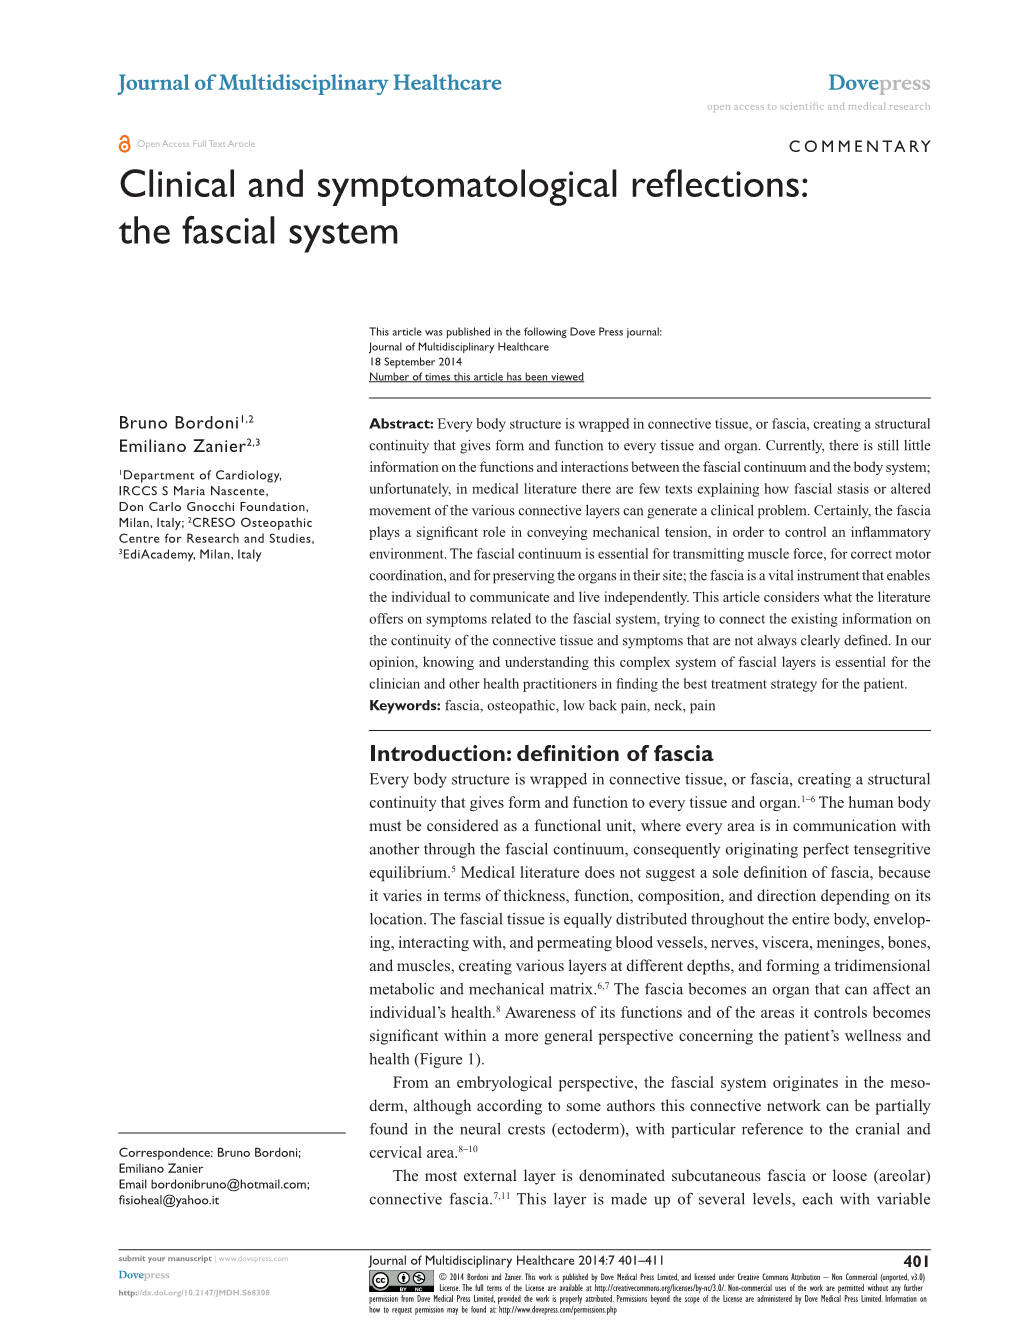 Clinical and Symptomatological Reflections: the Fascial System